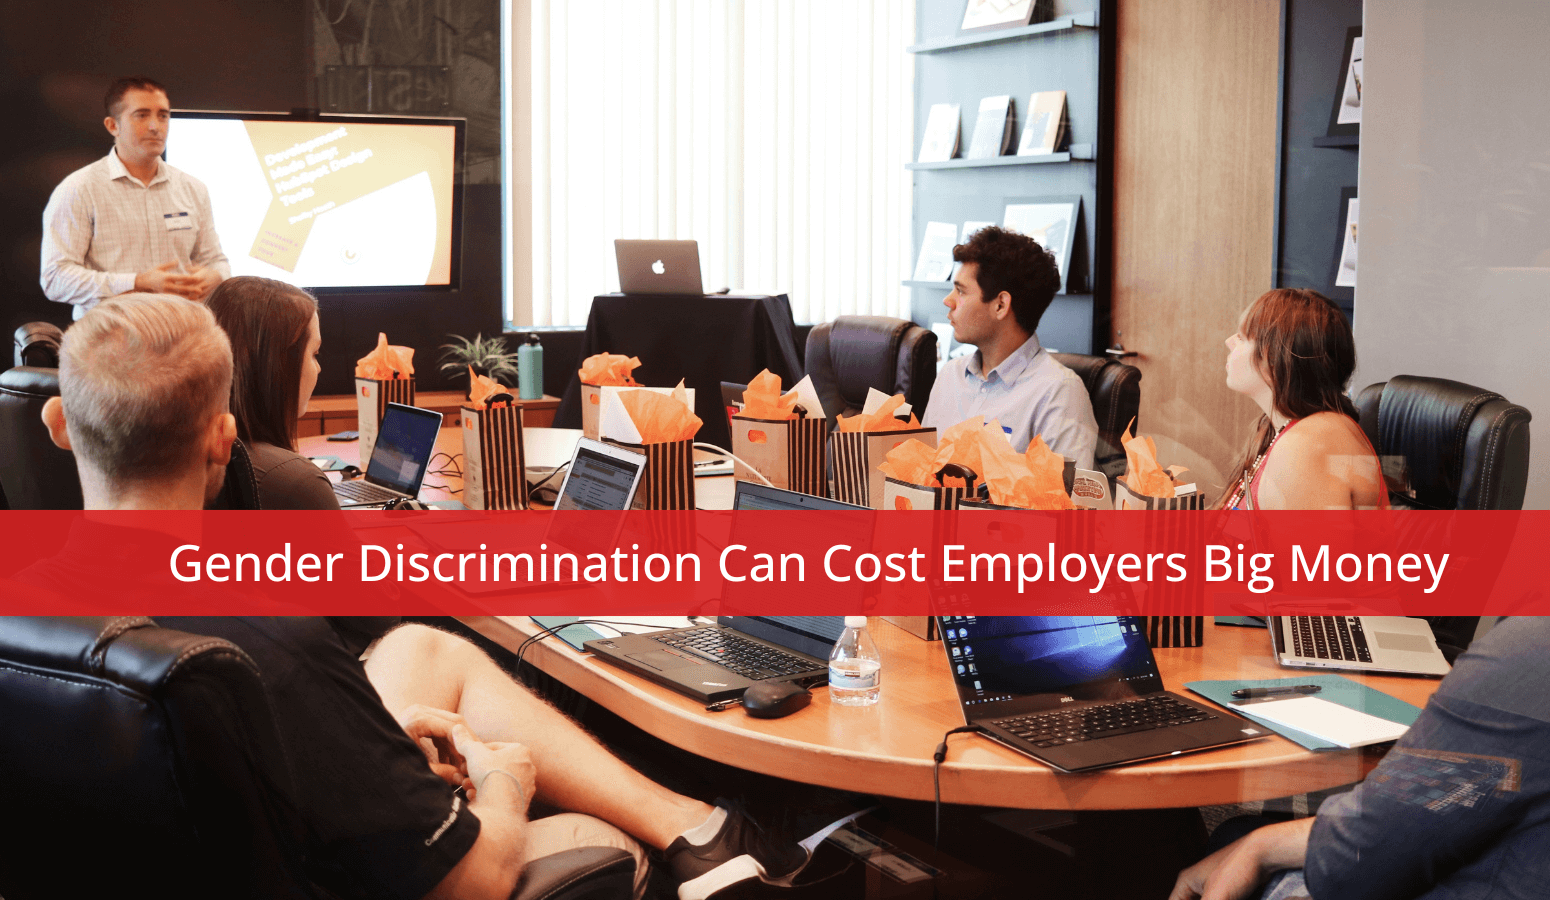 Featured image for “Gender Discrimination Can Cost Employers Big Money”